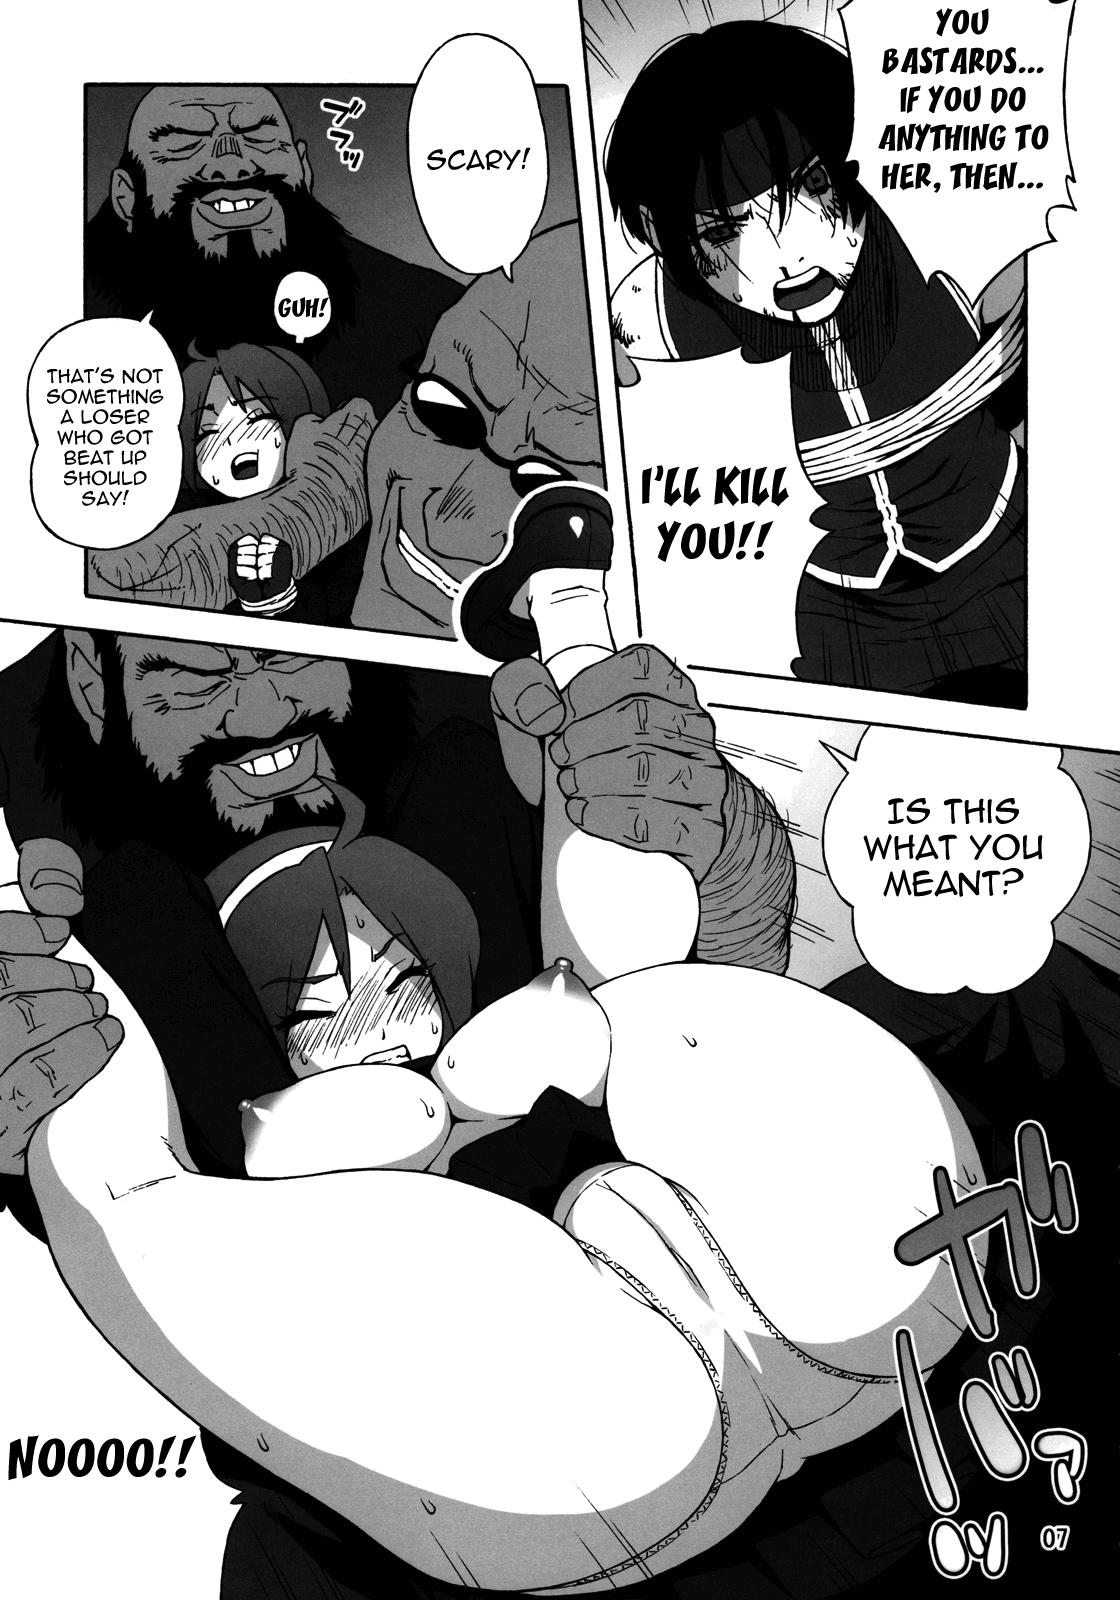 Desi A.N.T.R. - King of fighters Hardcore Porno - Page 6